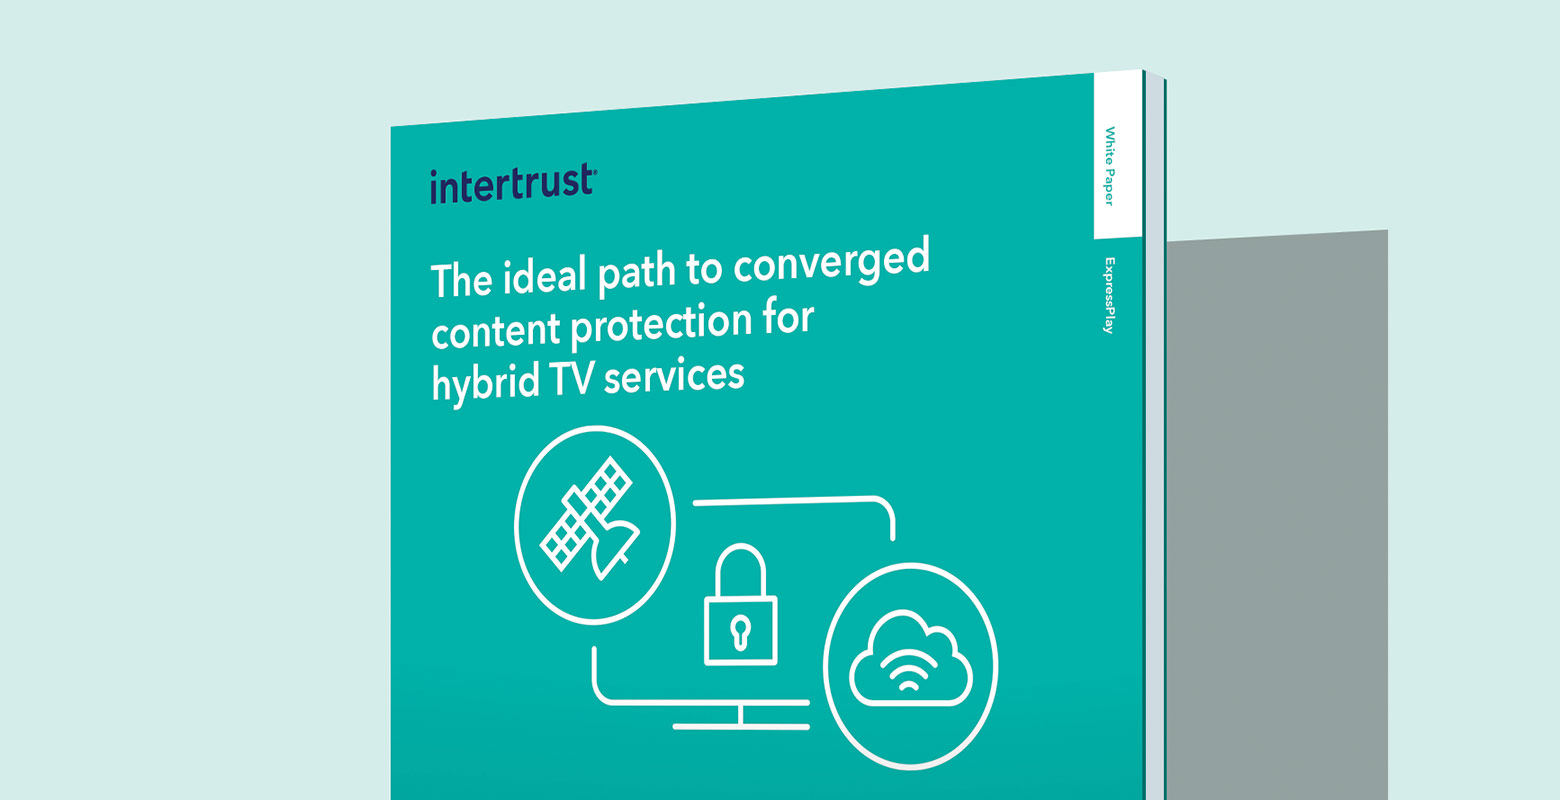 The ideal path to converged content protection for hybrid TV services hero graphic